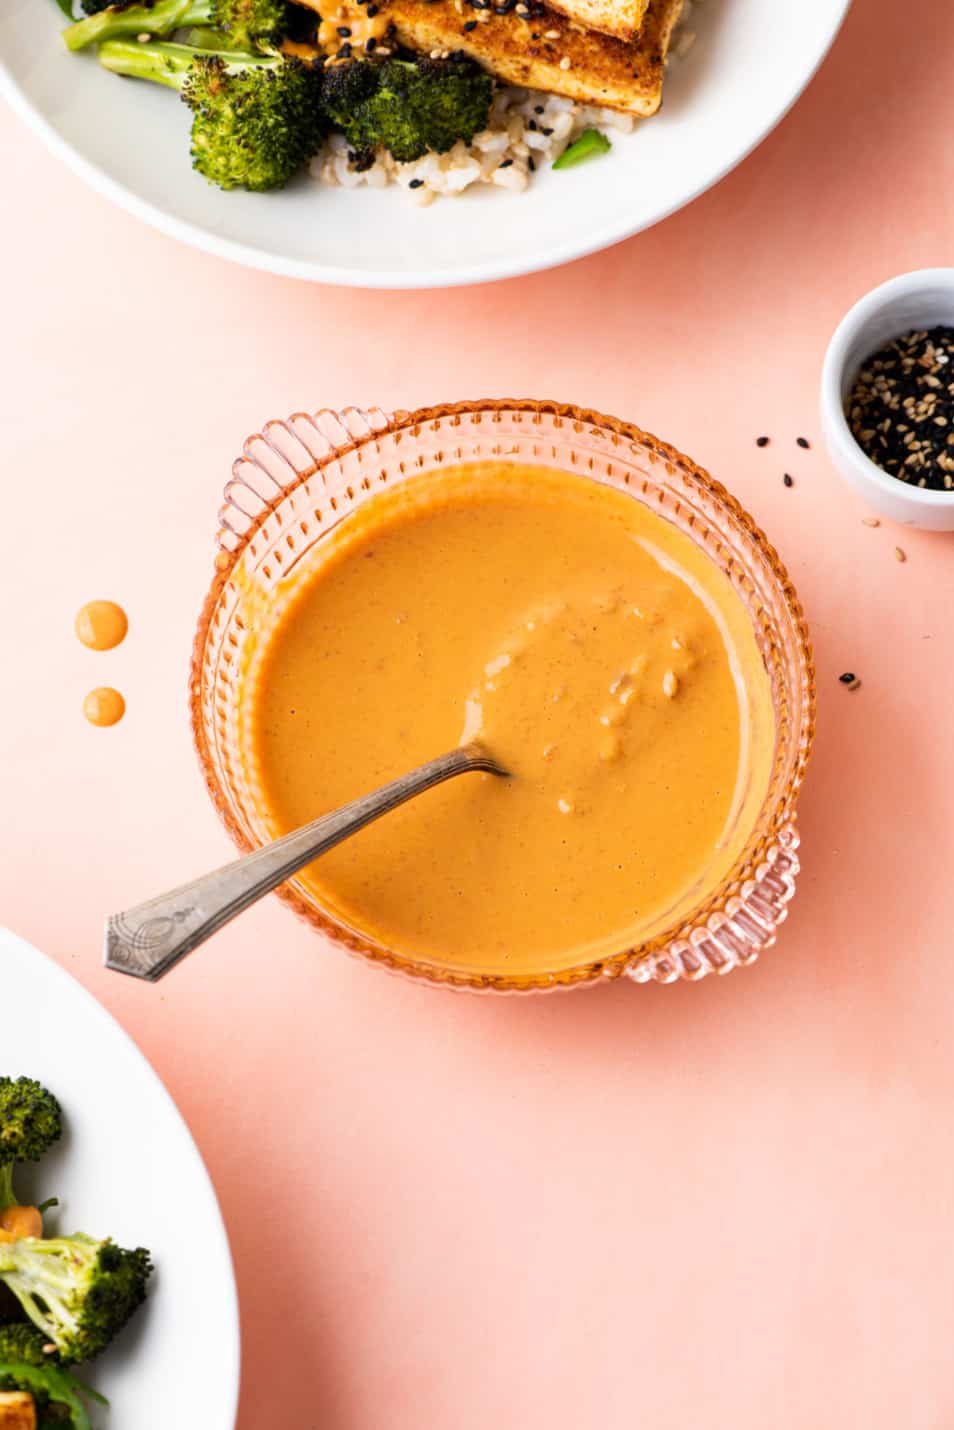 Peanut sauce in a vintage pink glass bowl